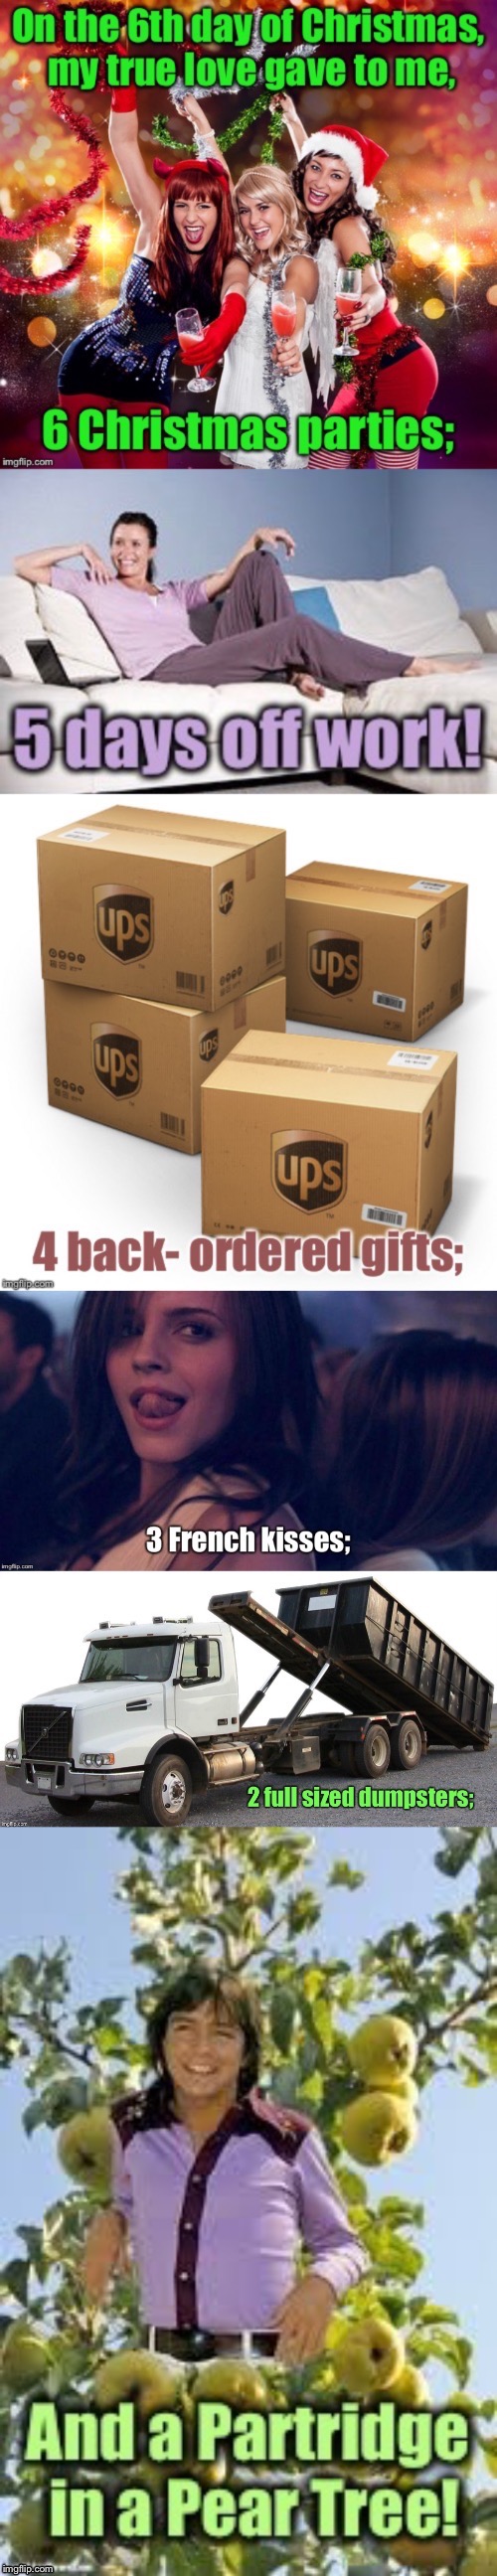 Dr. Sarcasm’s 12 days of Christmas: Day 6  | . | image tagged in 12 days of christmas,christmas parties,off work,back ordered packages,french kisses,drsarcasm | made w/ Imgflip meme maker